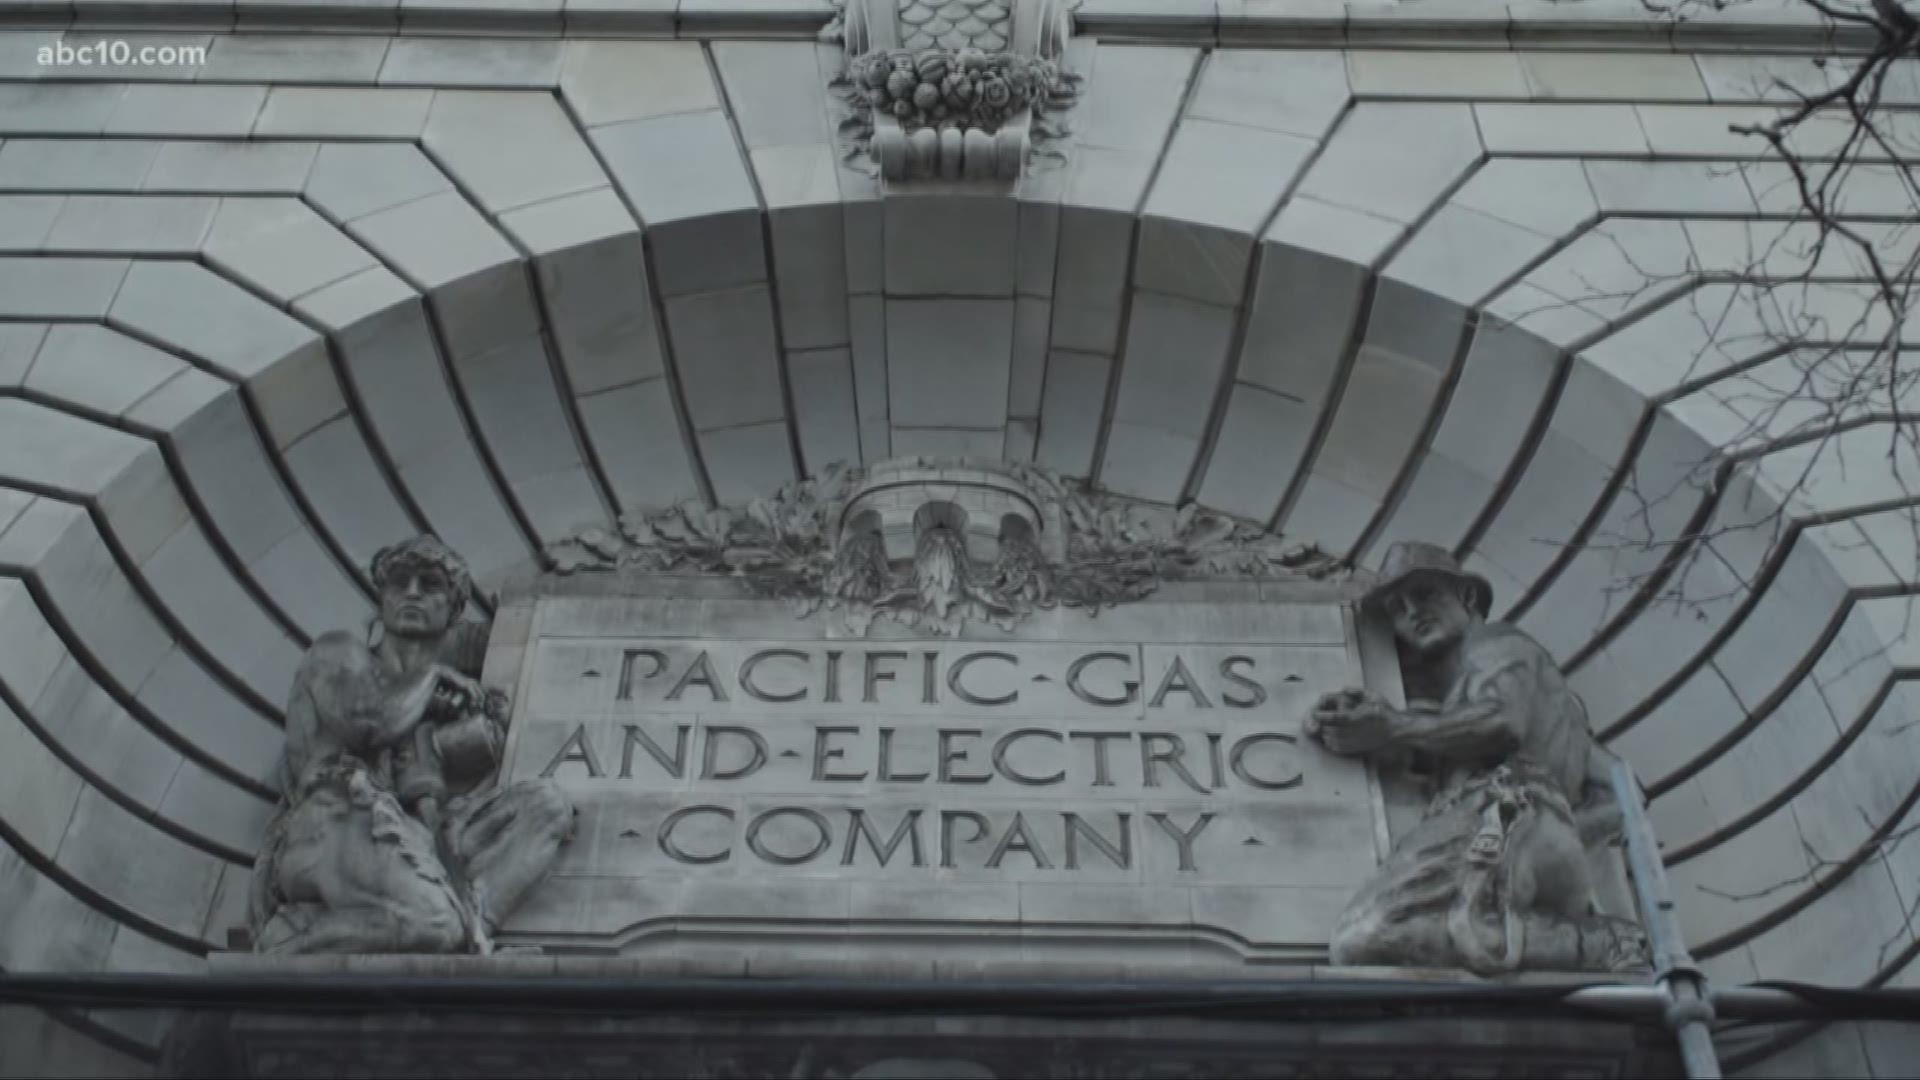 The California Public Utilities Commission said Pacific Gas & Electric (PG&E) violated the state's public utility code.